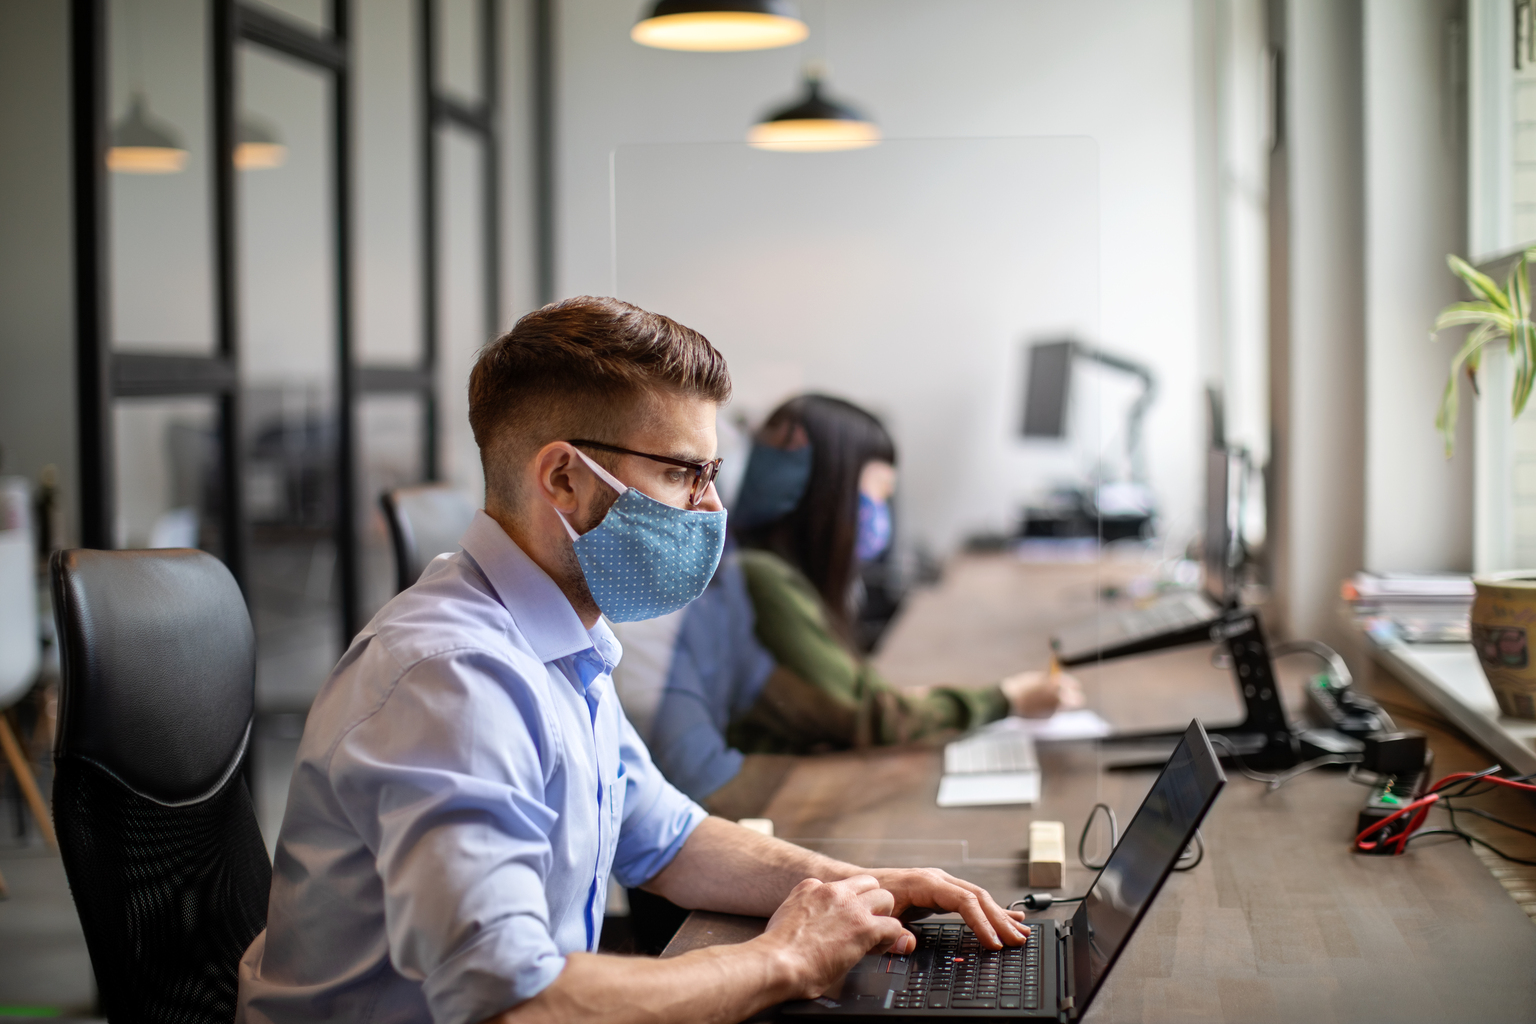 People Working in Mask at Office keeping 6 feet distance